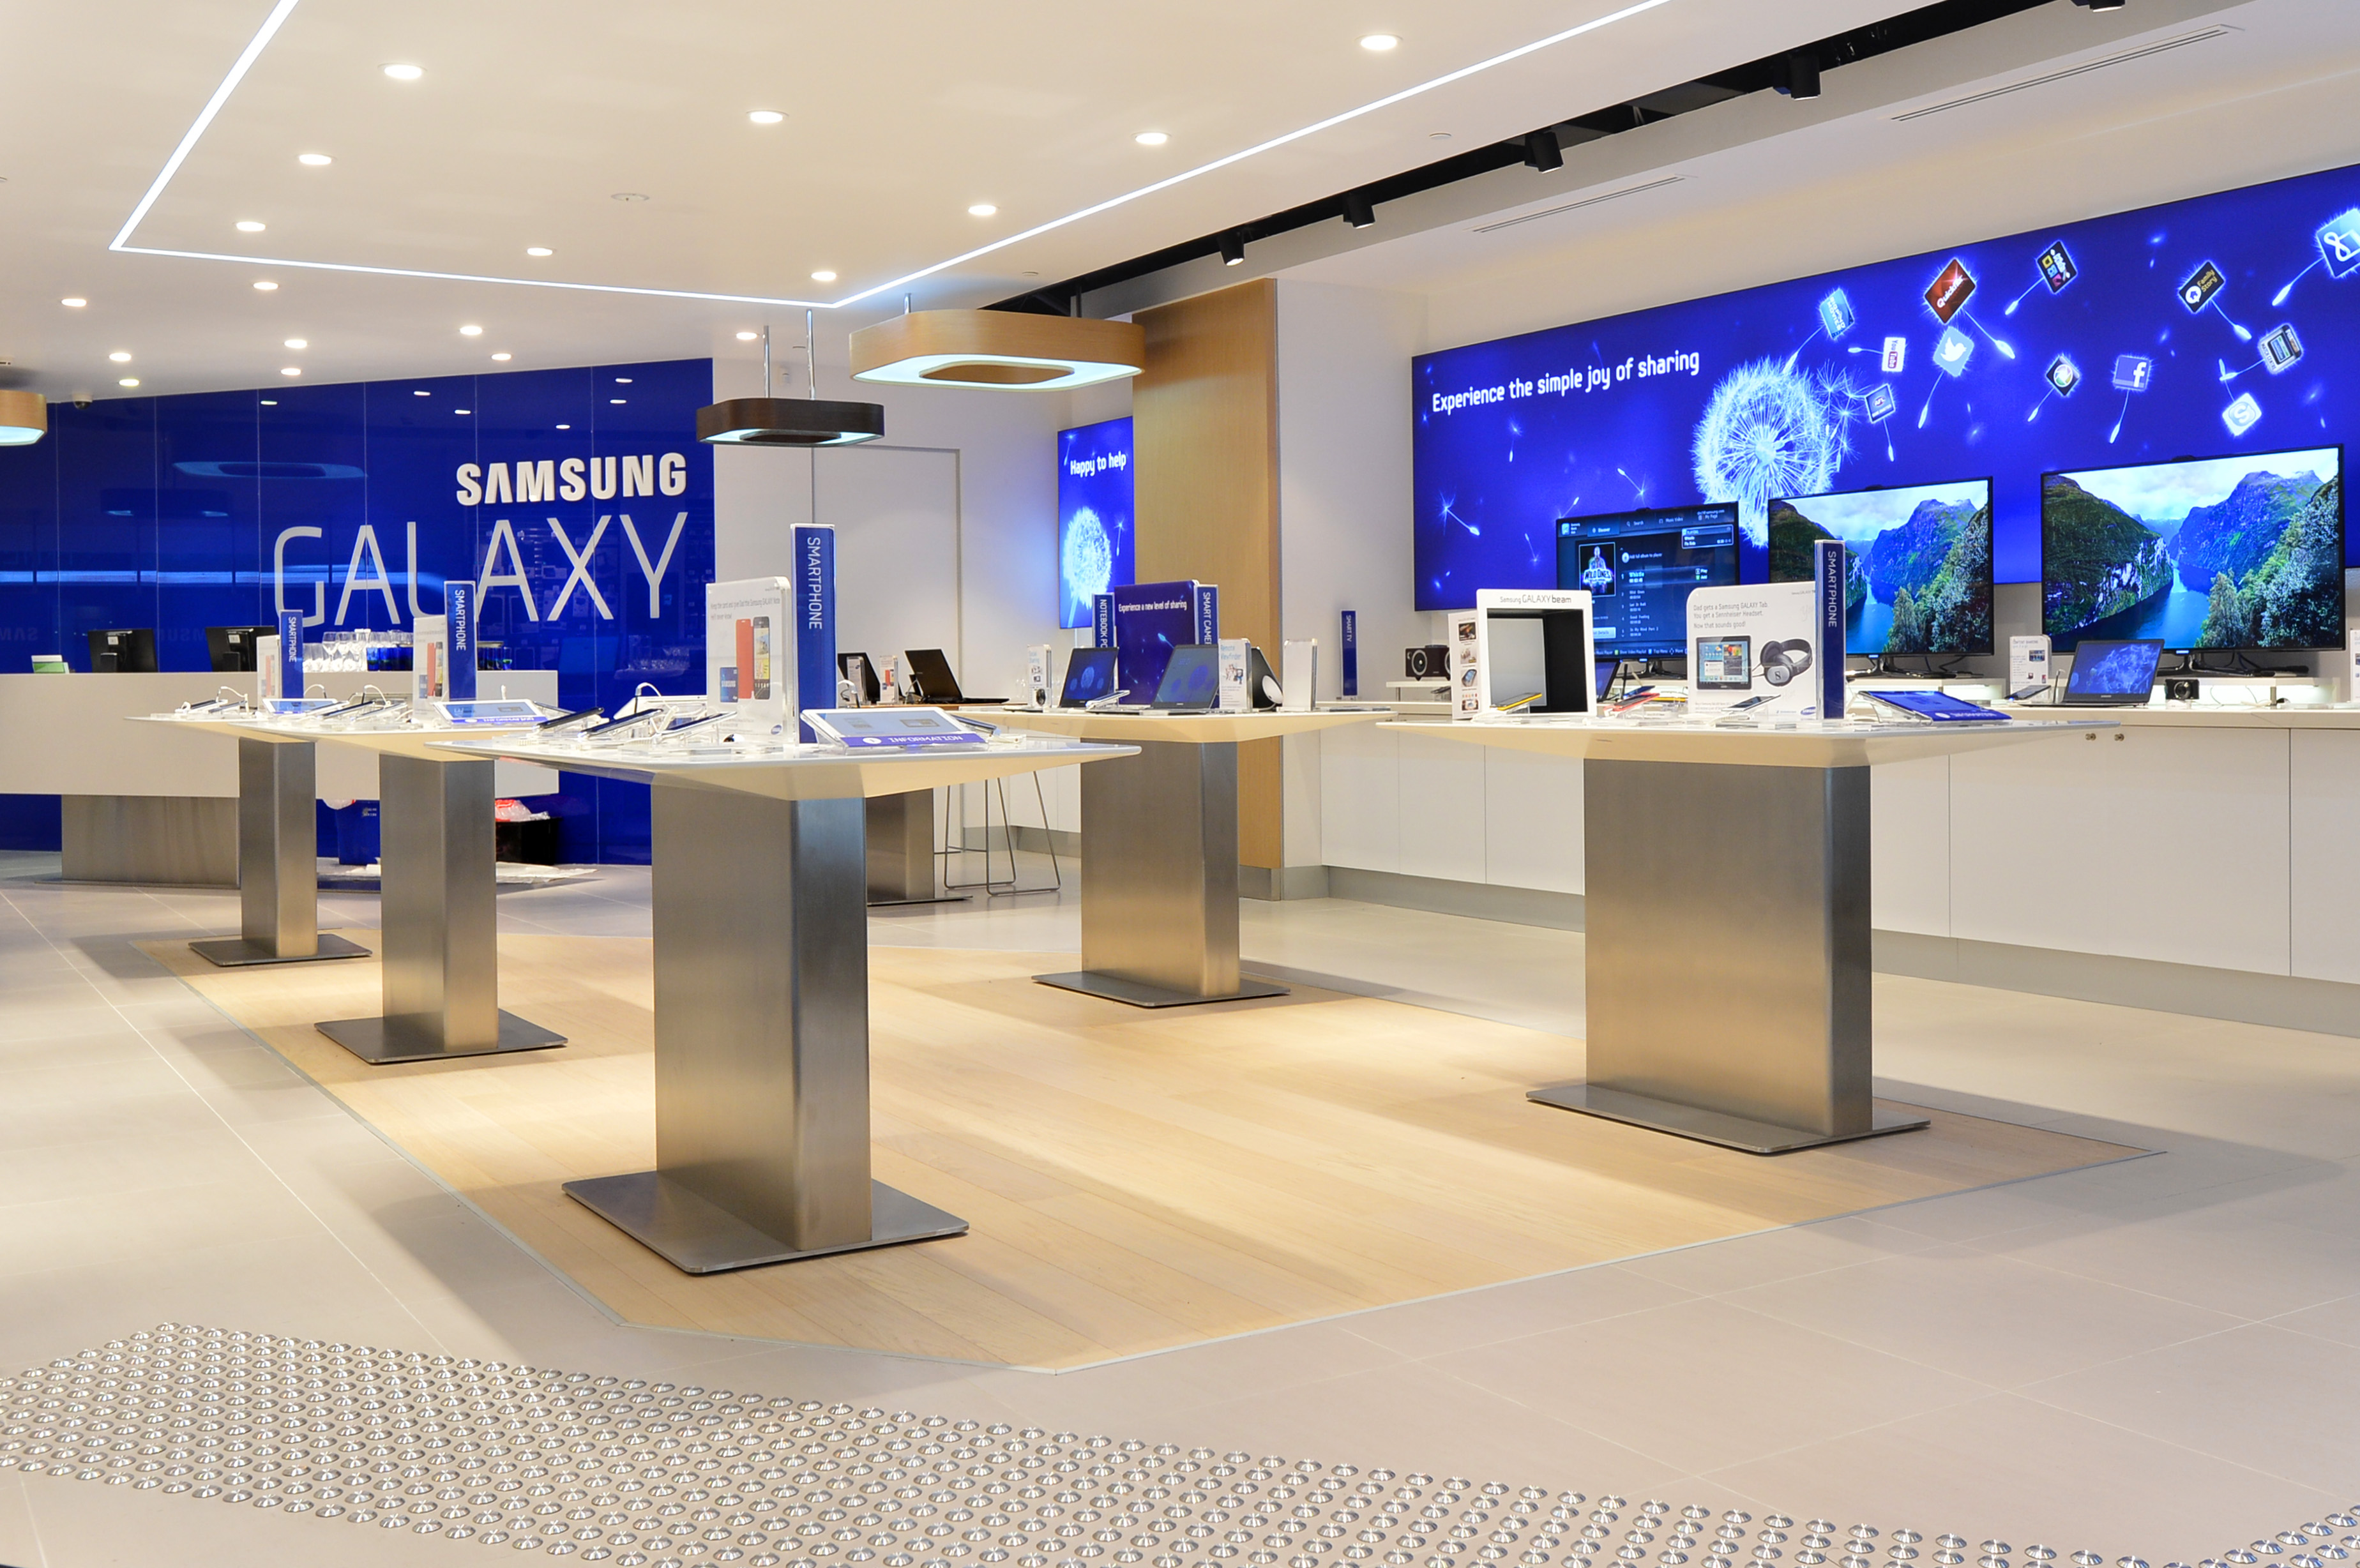 Apple granted trademark protections for the interior of the Apple Store